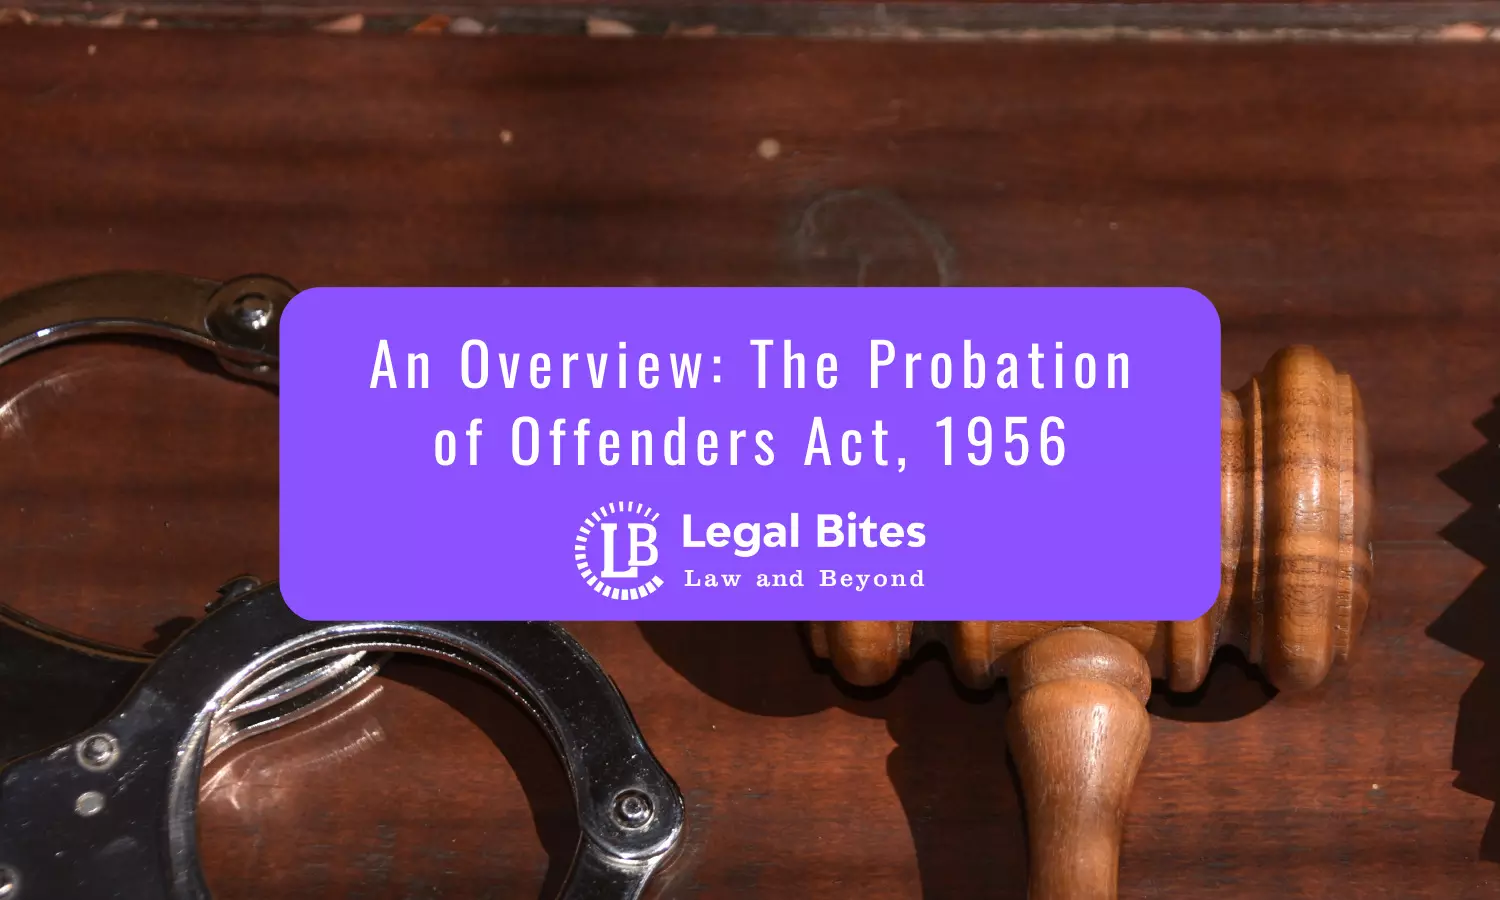 The Probation of Offenders Act, 1956: An Overview